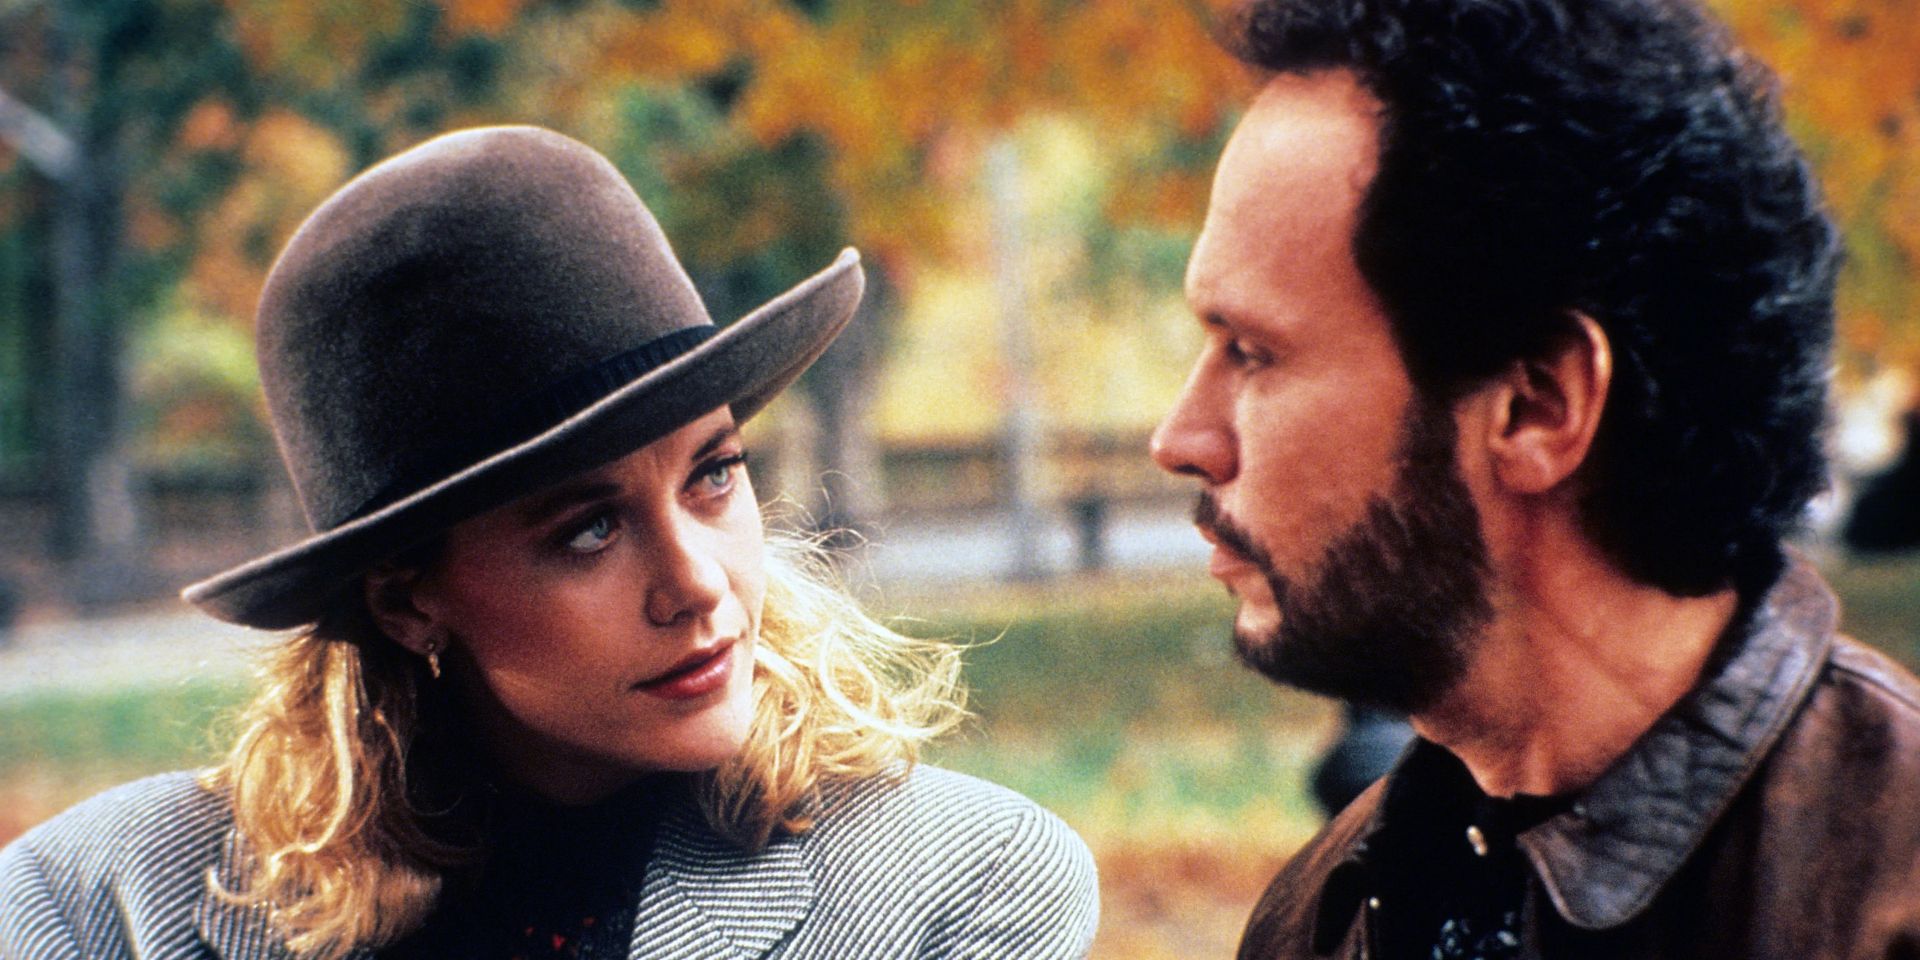 Meg Ryan and Billy Crystal in When Harry Met Sally standing together in a park probably NYC